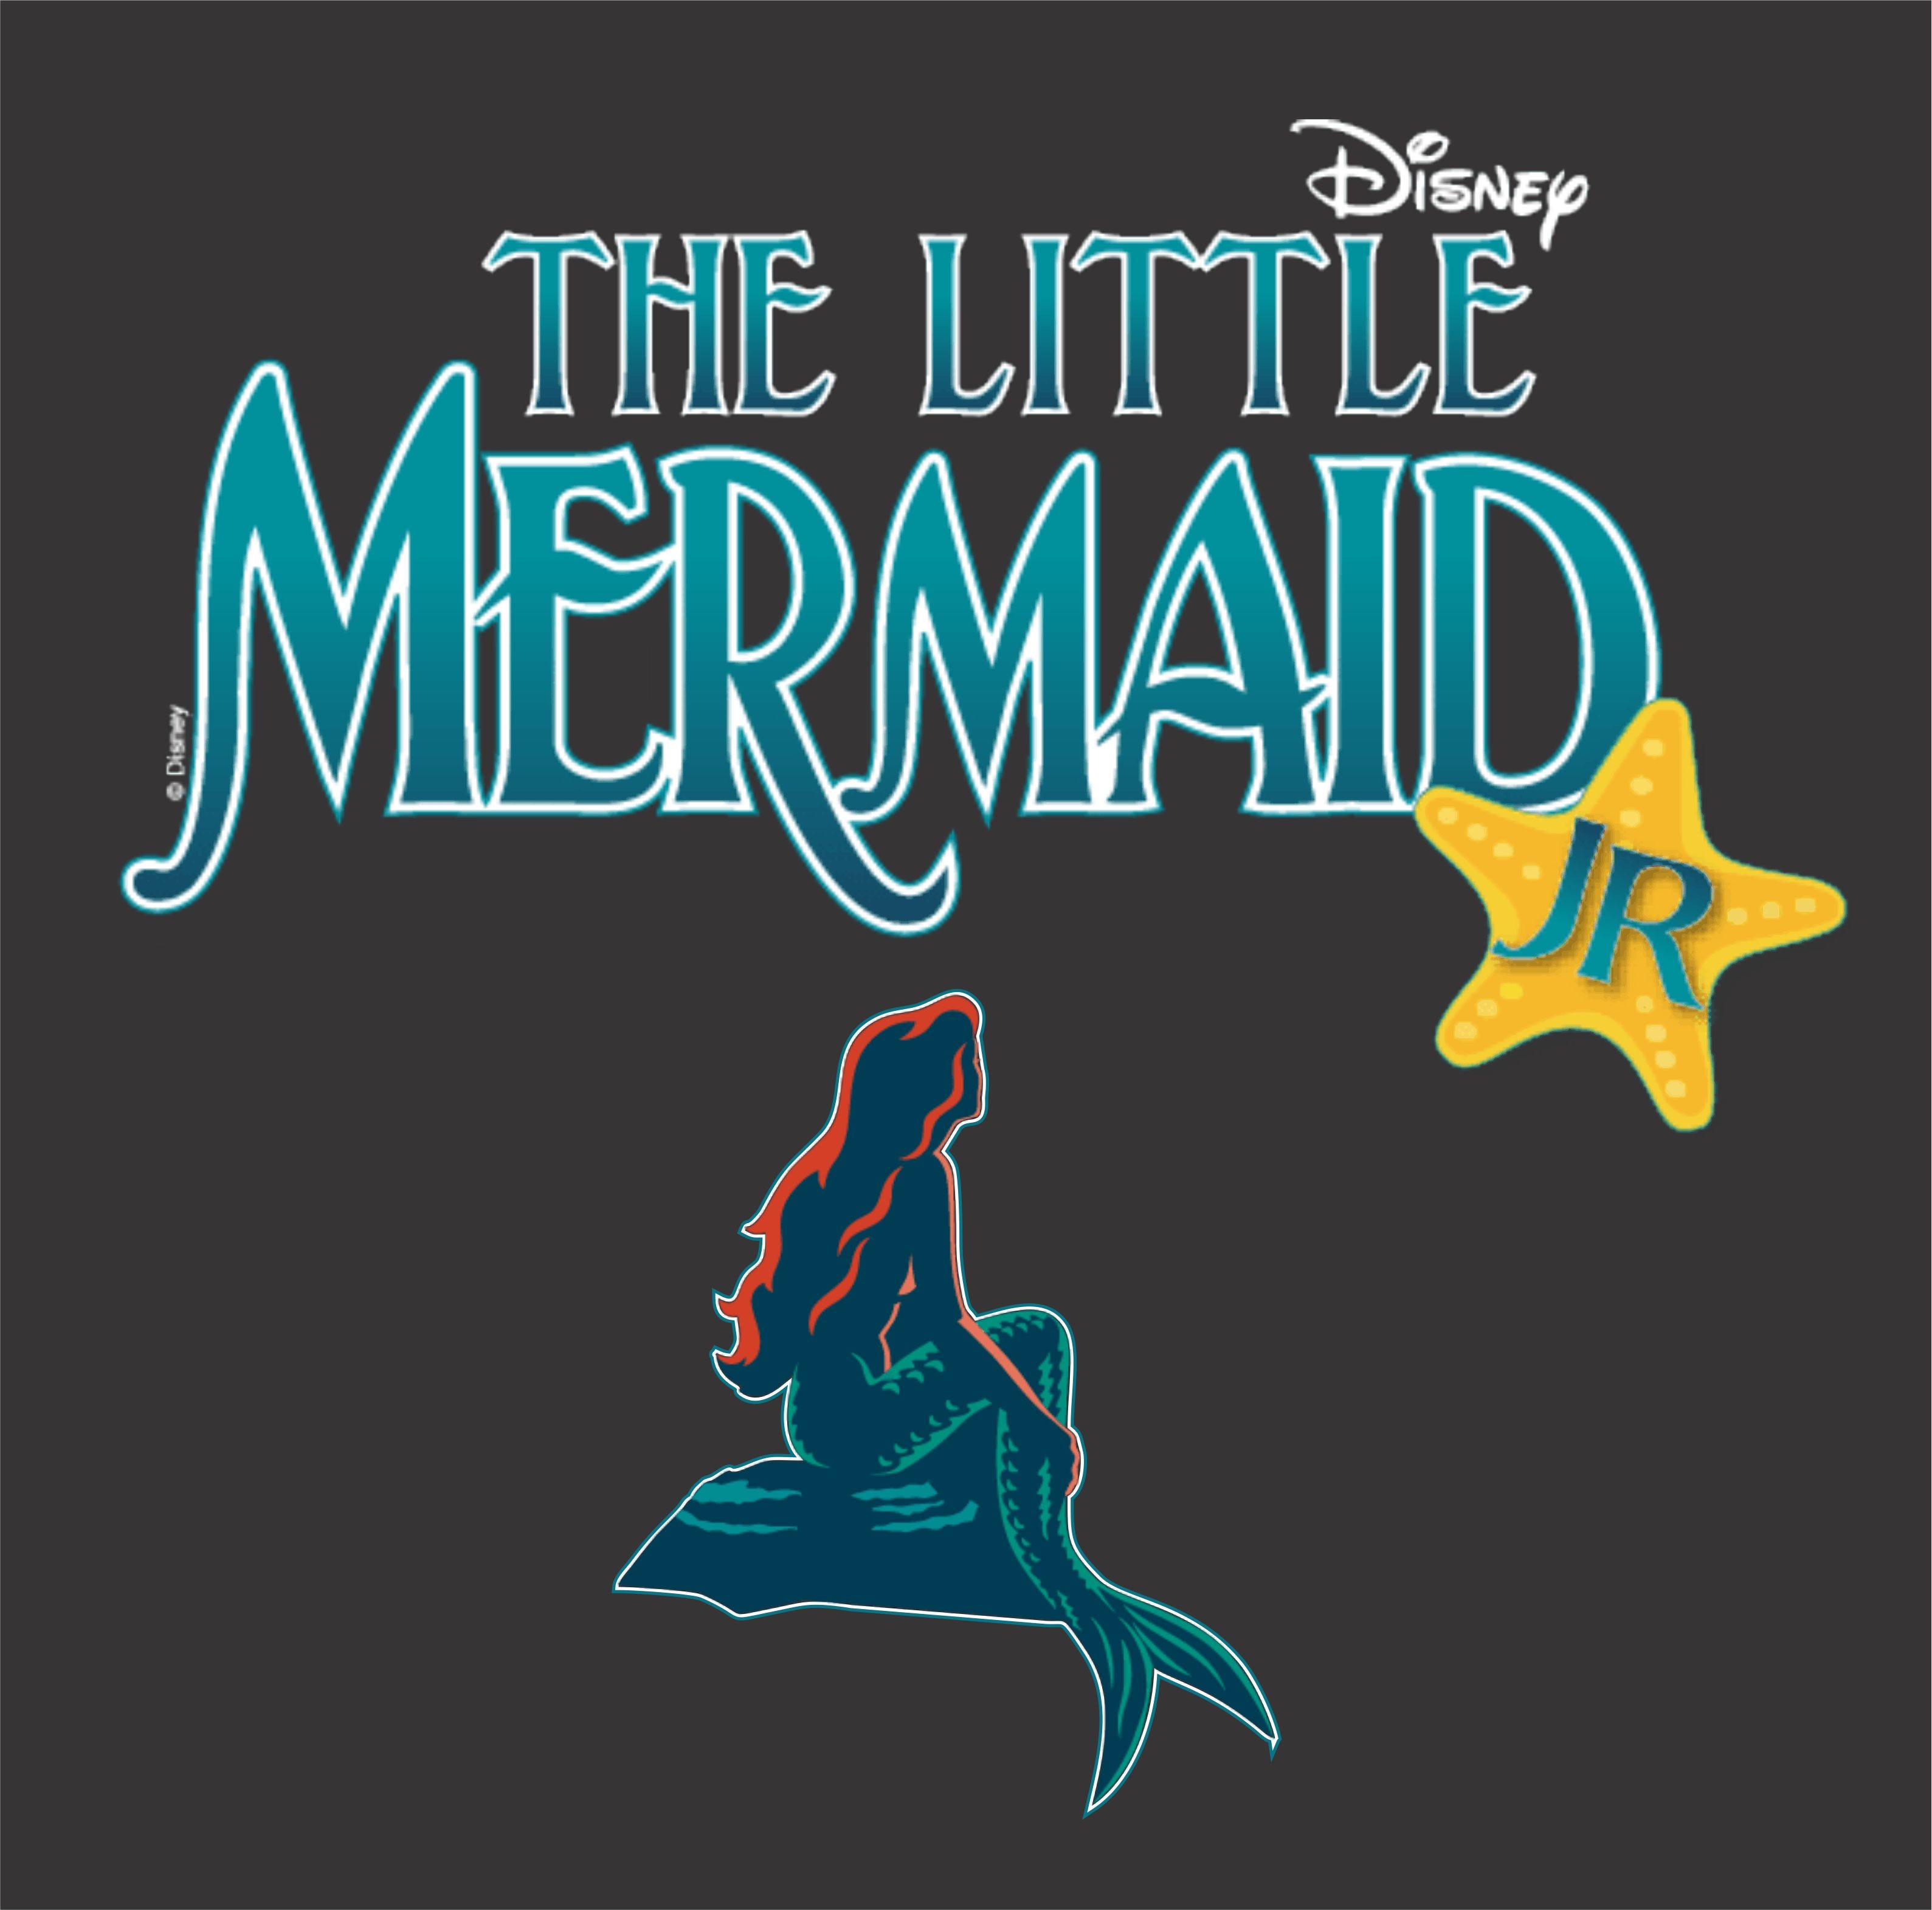 Journey Under The Sea With Little Mermaid Jr At Kms March 11 13